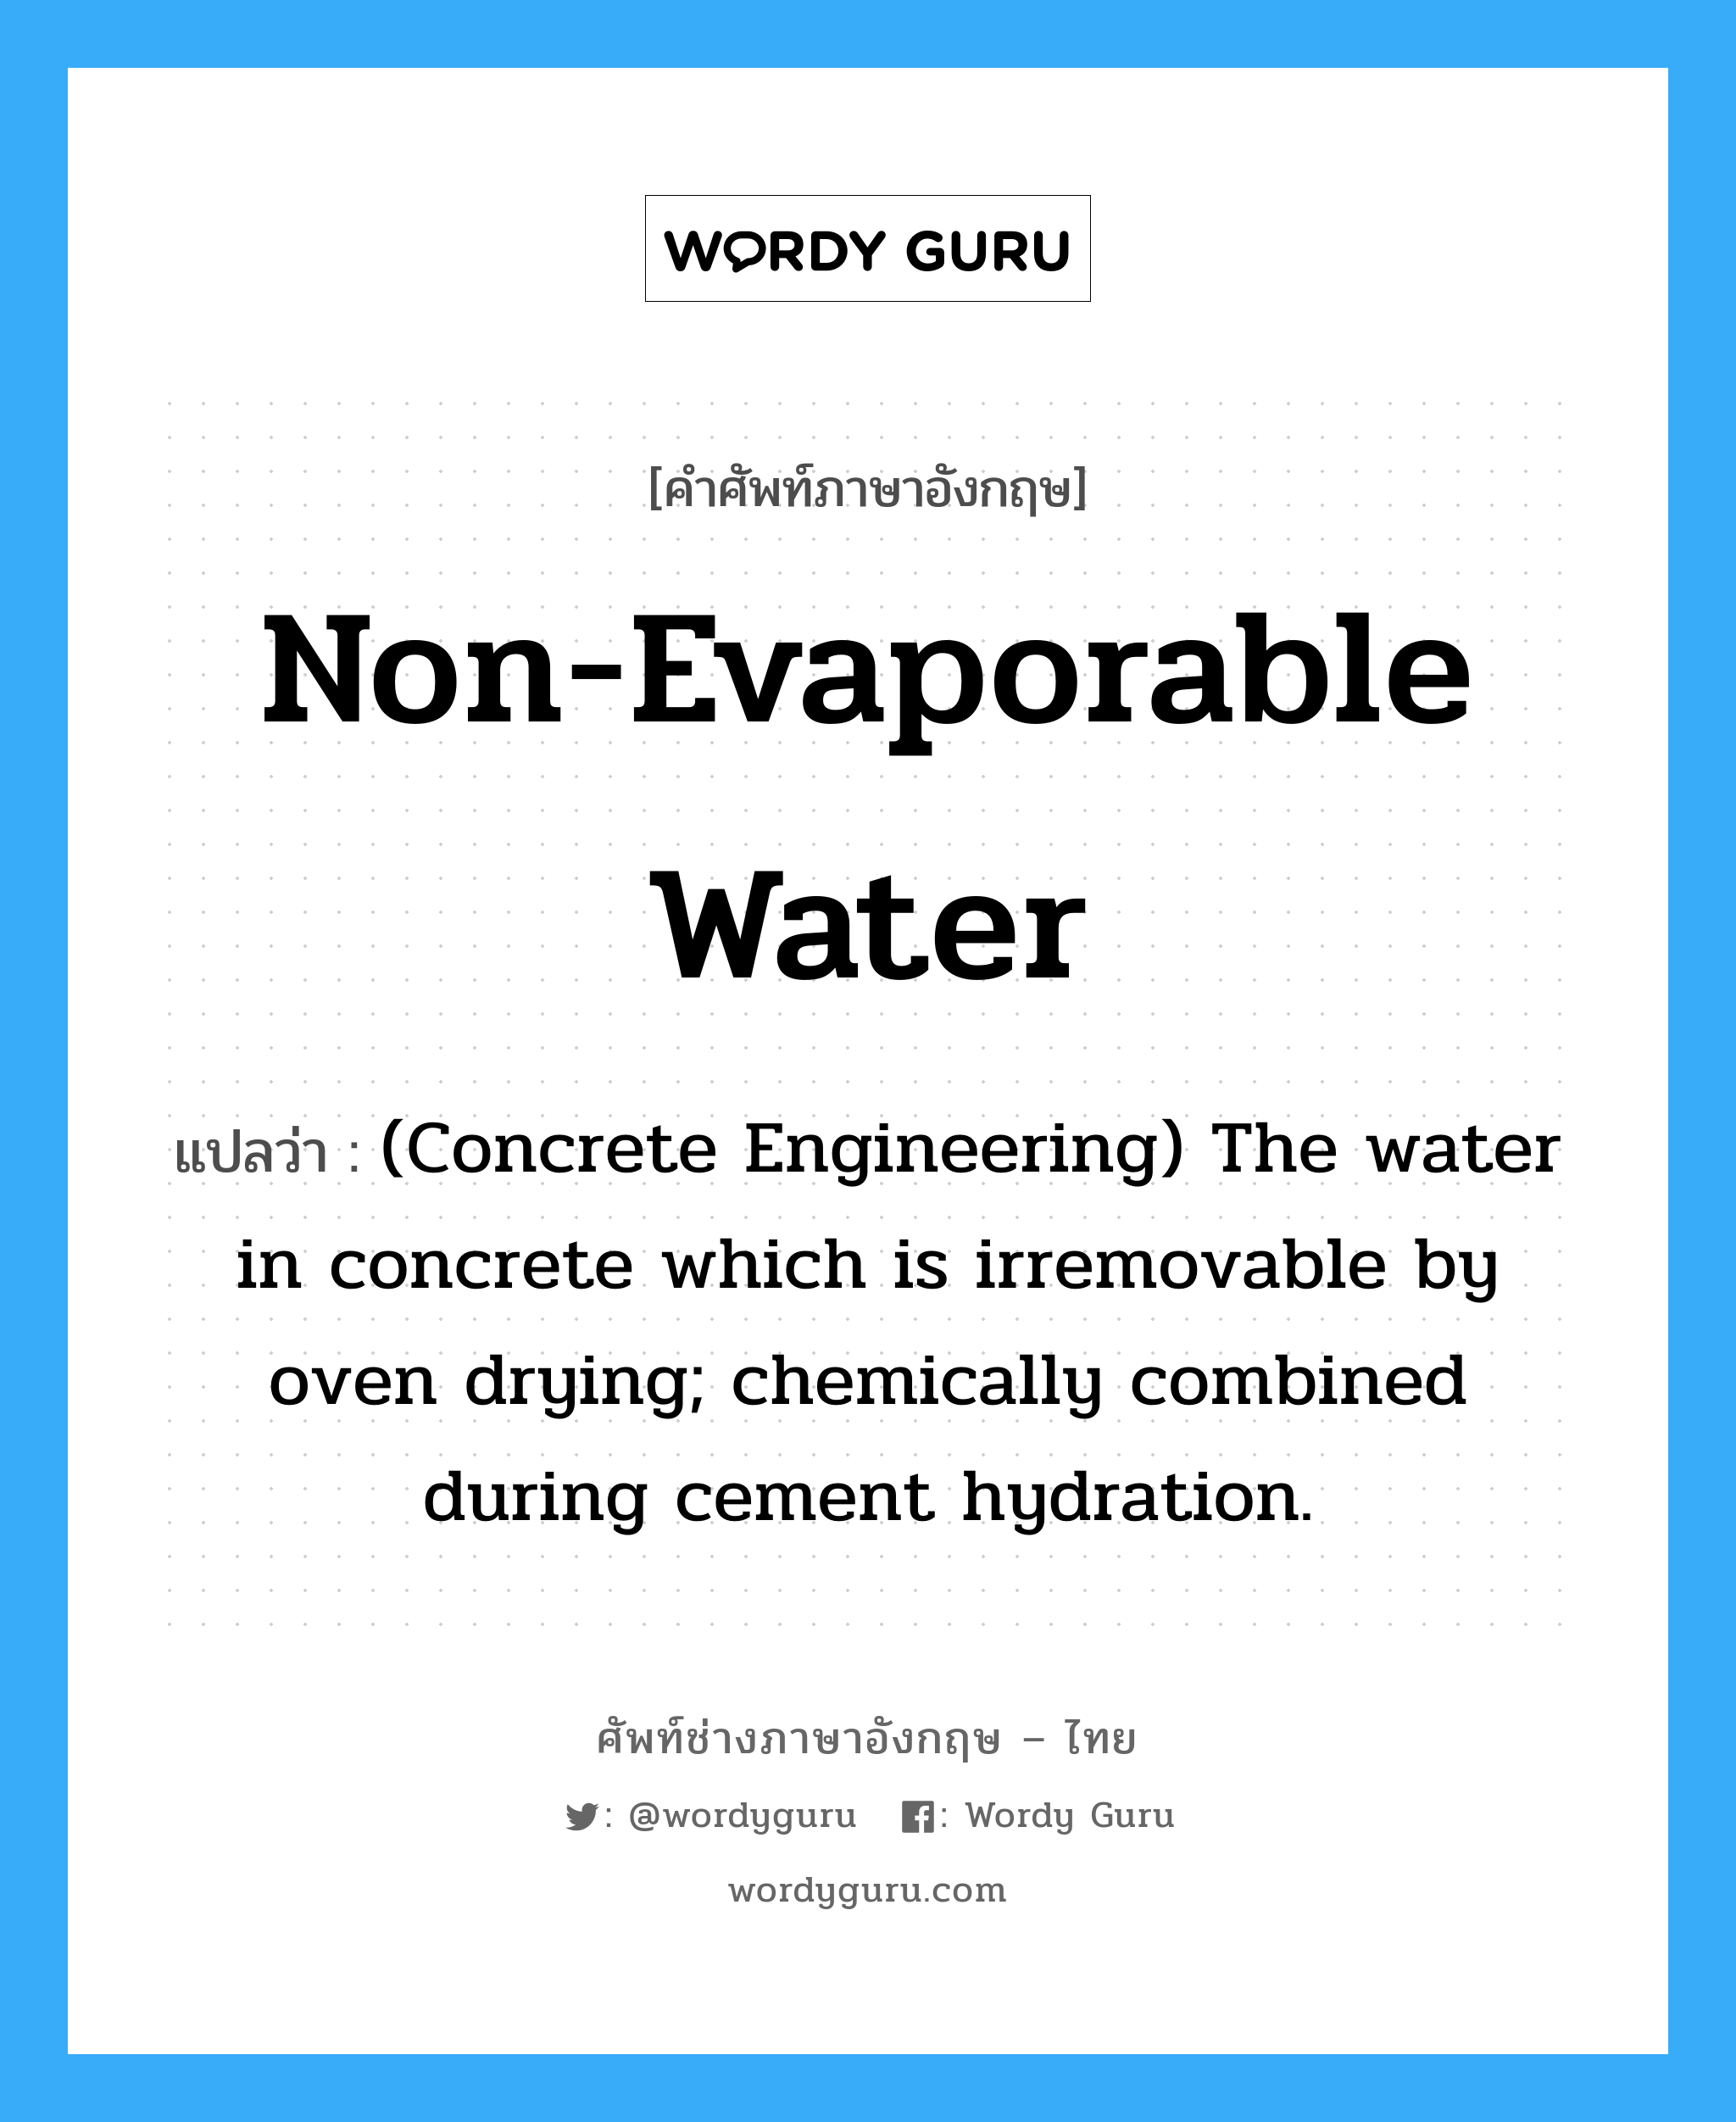 (Concrete Engineering) The water in concrete which is irremovable by oven drying; chemically combined during cement hydration. ภาษาอังกฤษ?, คำศัพท์ช่างภาษาอังกฤษ - ไทย (Concrete Engineering) The water in concrete which is irremovable by oven drying; chemically combined during cement hydration. คำศัพท์ภาษาอังกฤษ (Concrete Engineering) The water in concrete which is irremovable by oven drying; chemically combined during cement hydration. แปลว่า Non-evaporable Water